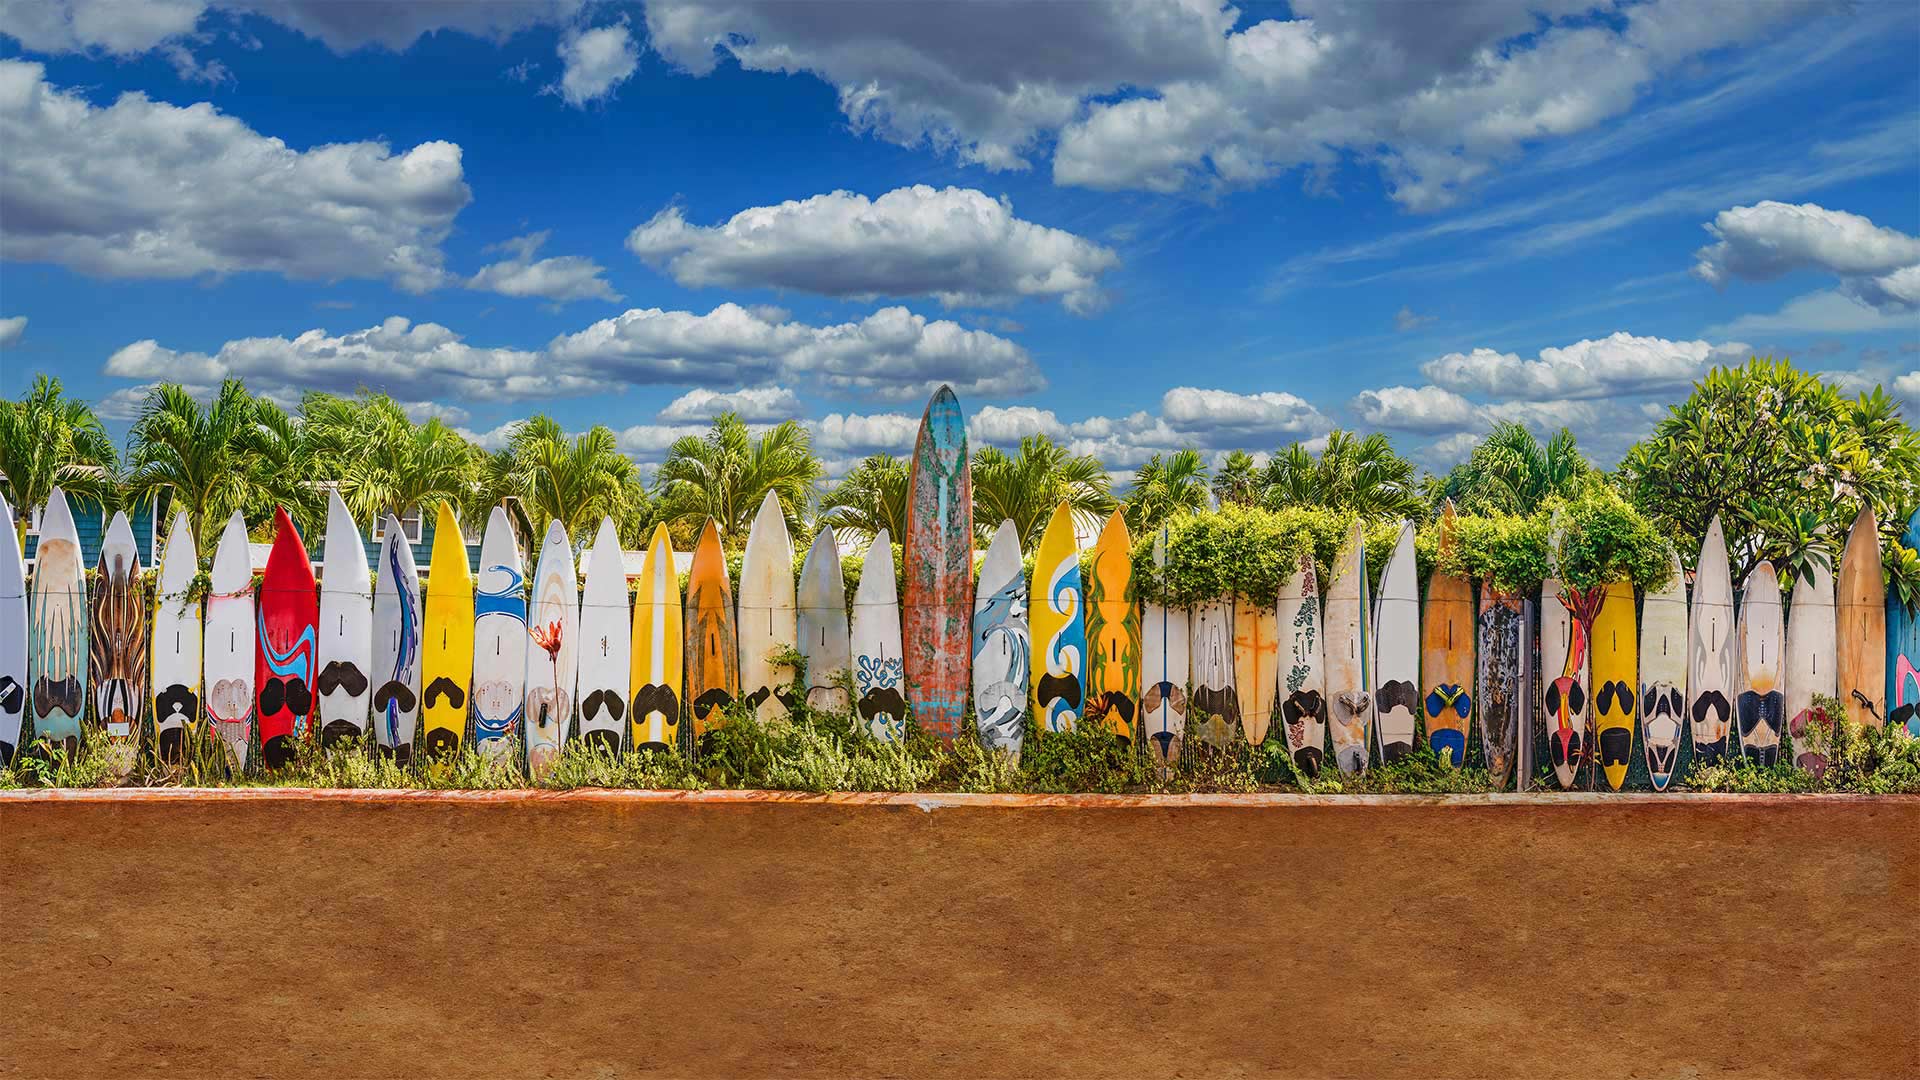 Old surfboards lined up as a fence near Paia, Maui, Hawaii - Matt Anderson Photography/Getty Images)